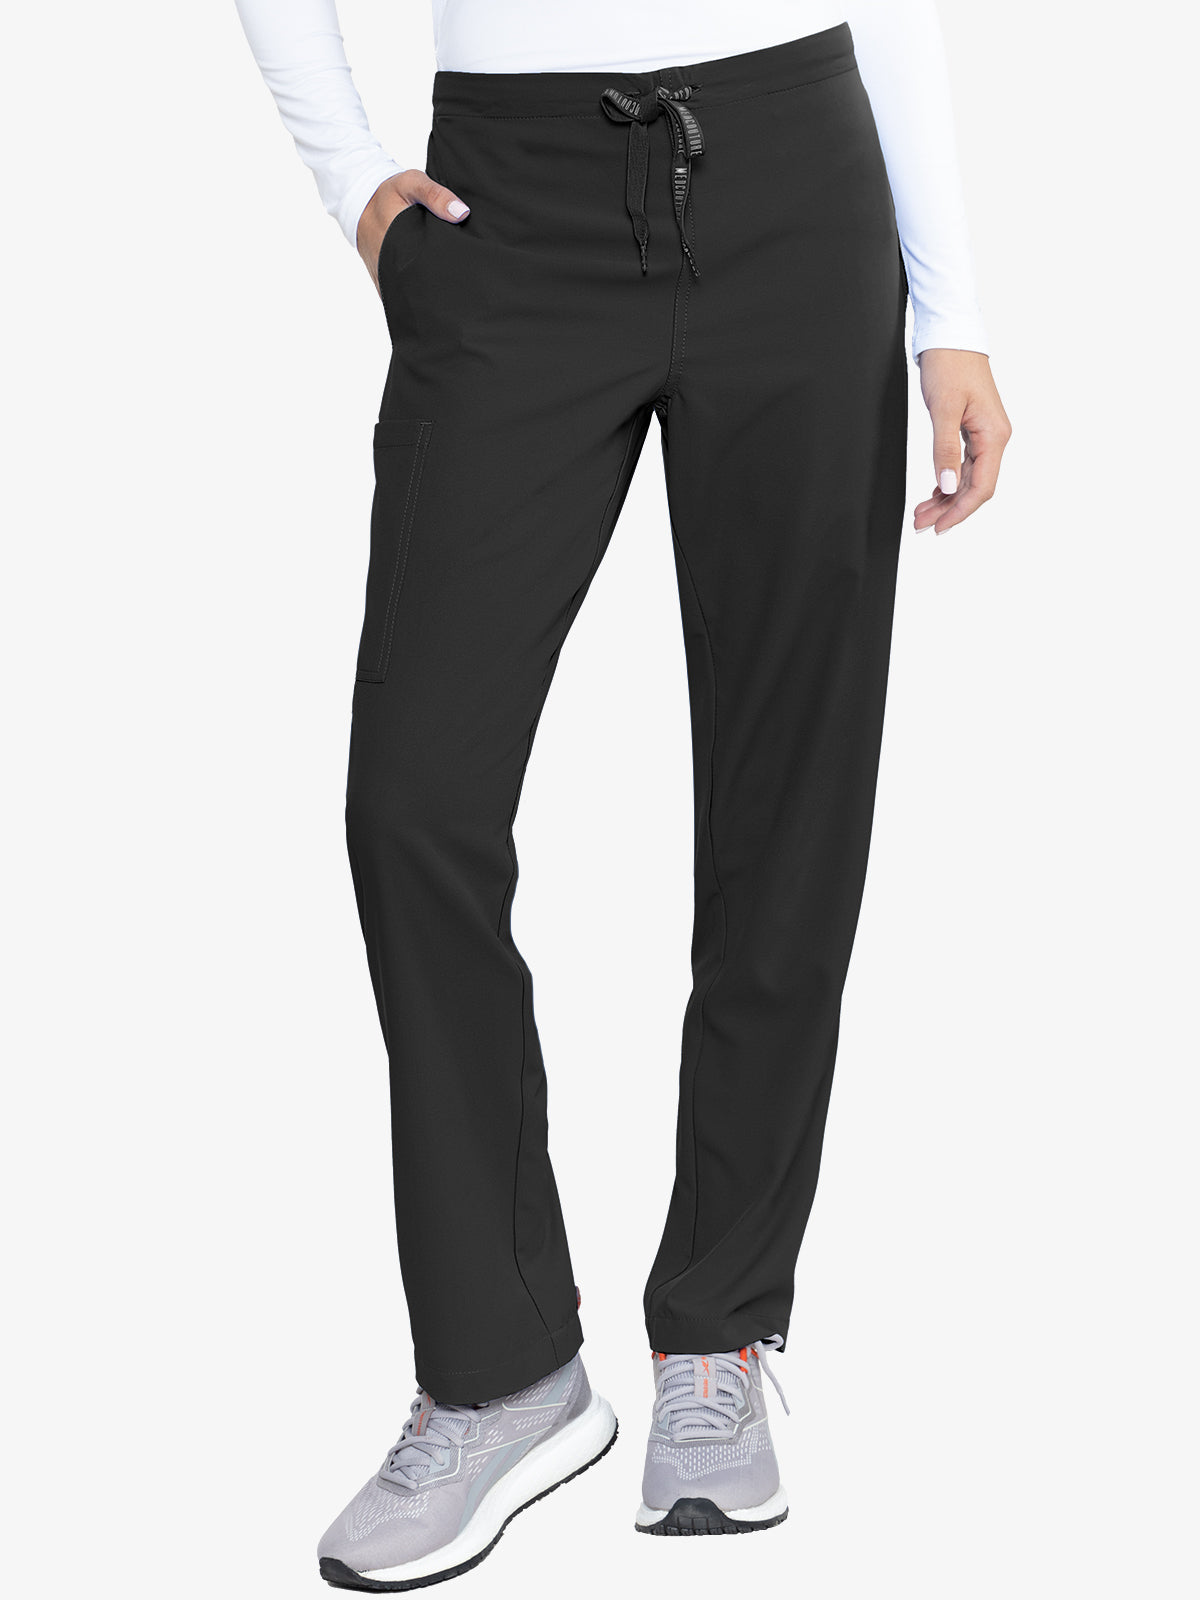 Med Couture Unisex Pant